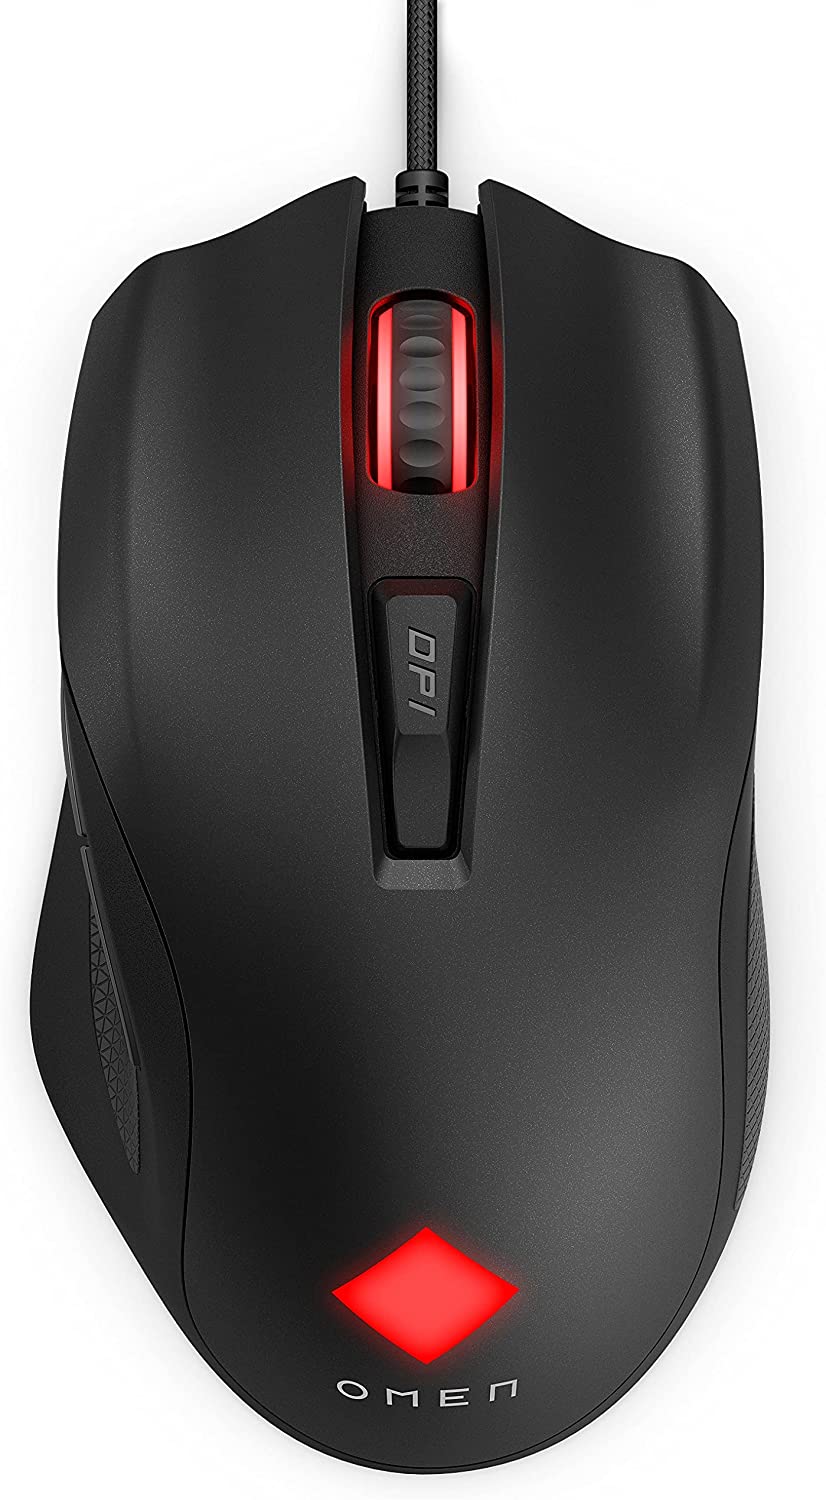 HP Omen Vector Wired Optical Gaming Mouse $9.99 + Free S&H w/ Prime or orders $25+ ~ Amazon